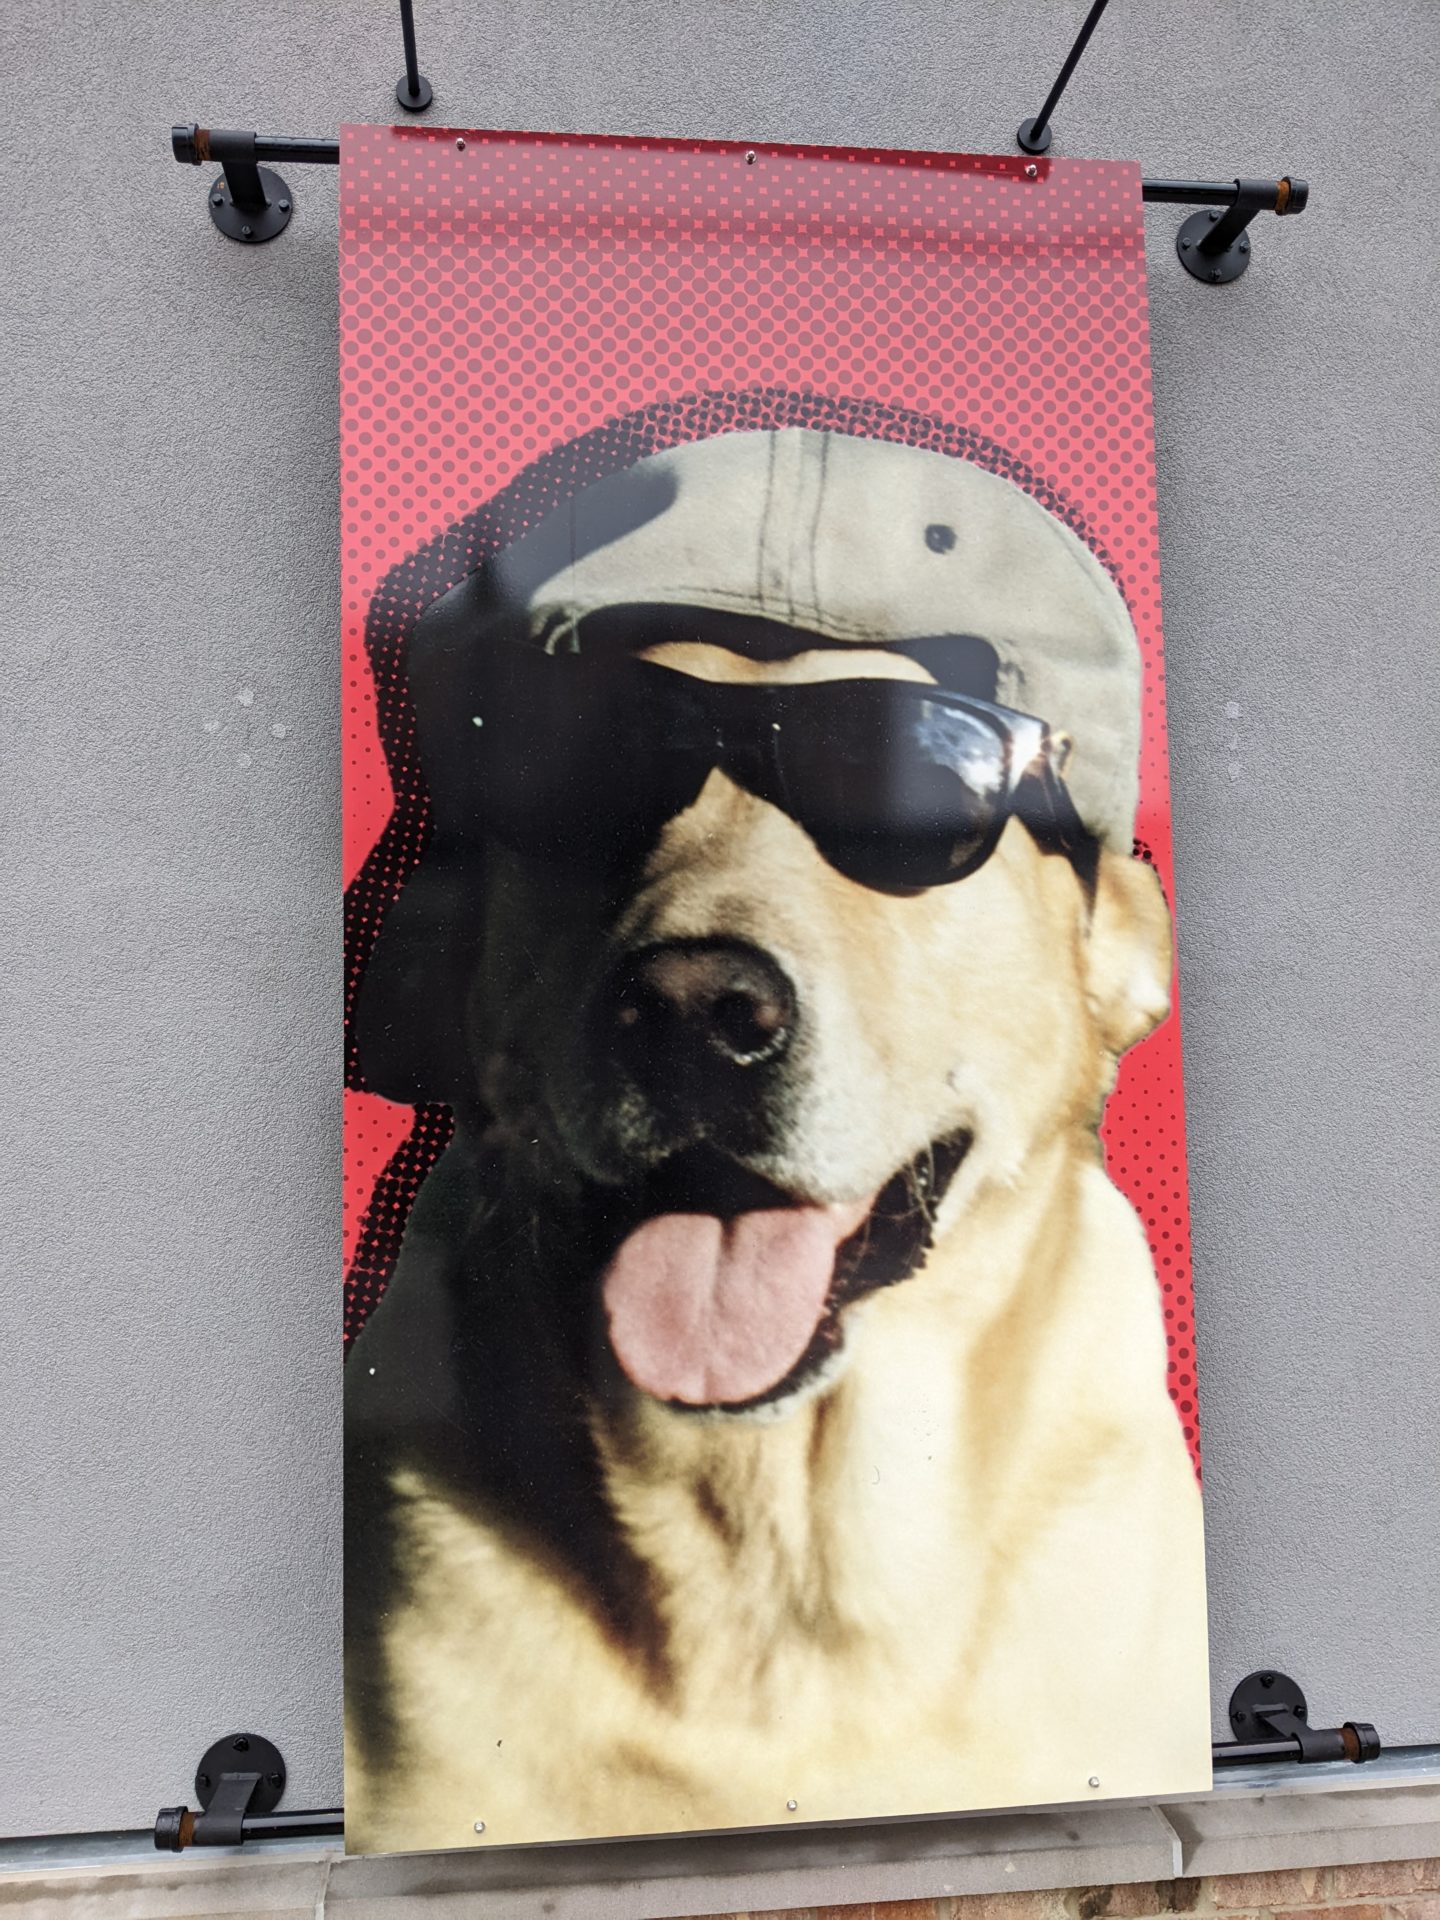 A rectangular vertical banner with the image of a dog in sunglasses and a hat. It has a red background.